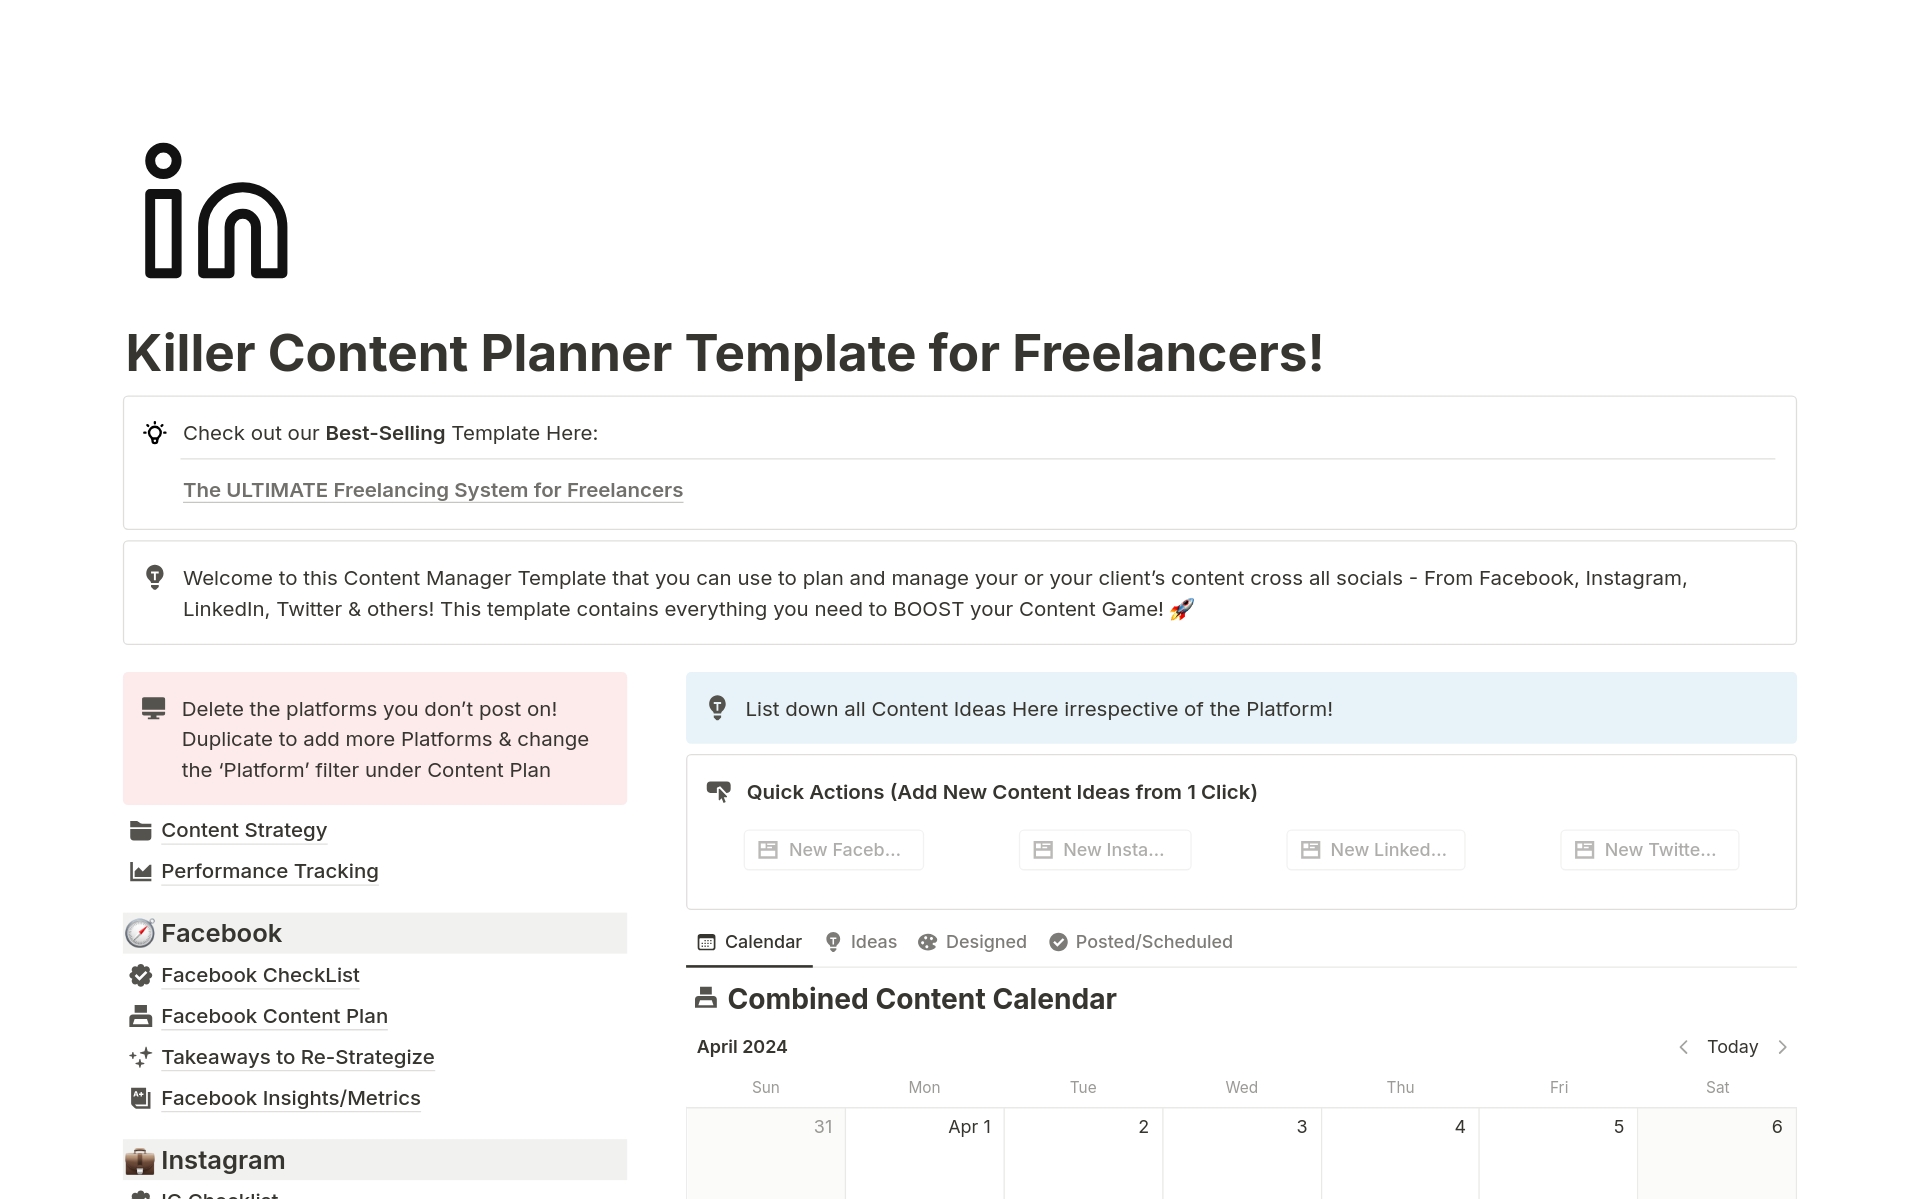 10X Your Content Game with our Killer Content Planner on Notion
Say Goodbye to Chaotic Content Calendars and Excel Sheets Forever! 🙋‍♂️